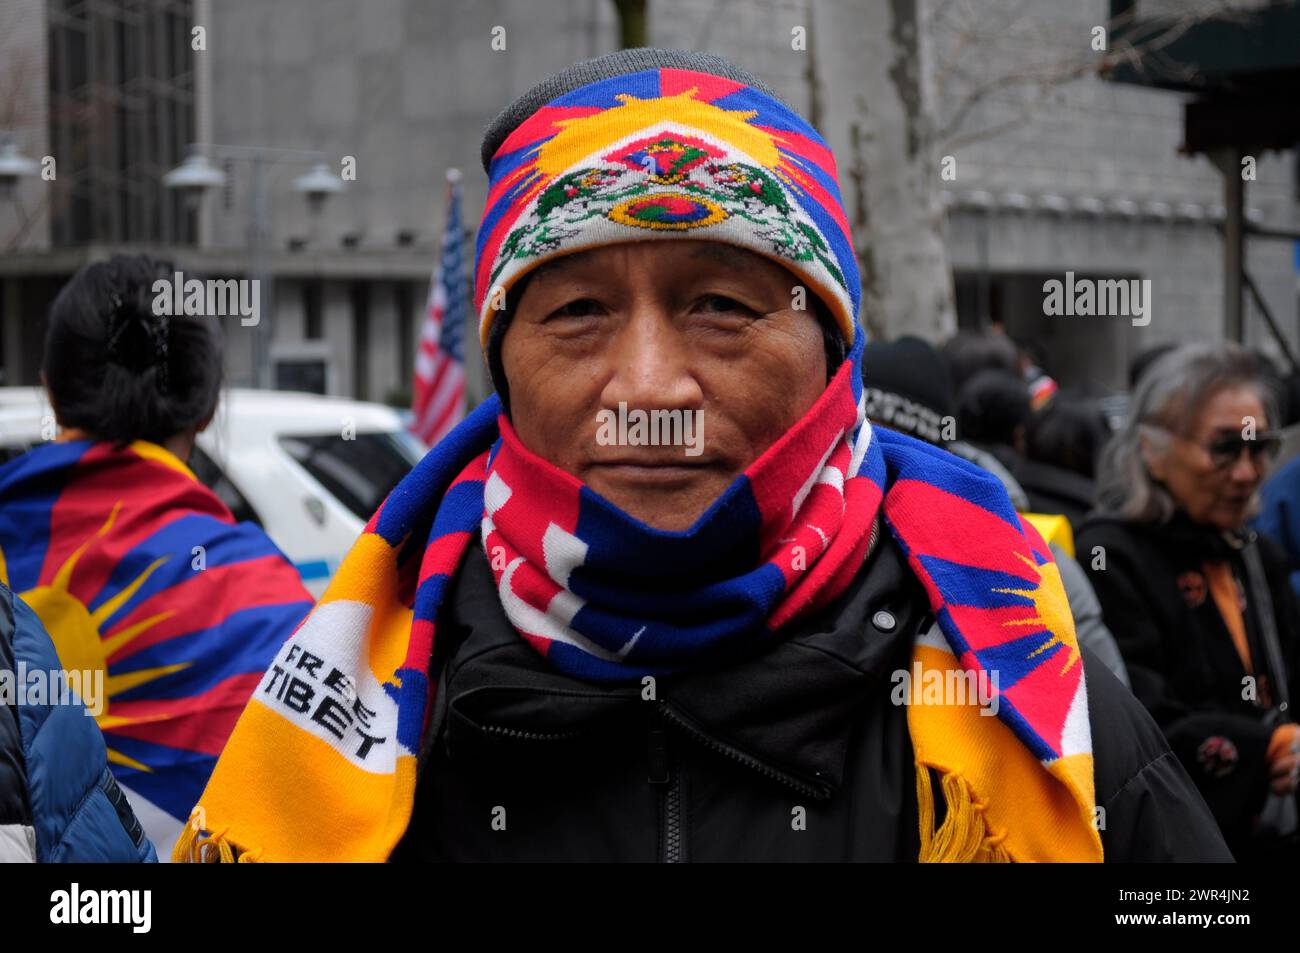 A pro-Tibet demonstrator wearing the colors of the Tibetan flag rallies at Dag Hammarskjöld Plaza near the United Nations building during the 65th Tibetan Uprising Day. Demonstrators rallied in Manhattan, New York City demanding Tibet's independence from China. The Tibetan Uprising Day marks the day in 1959 when thousands of Tibetans in Tibet surrounded the palace of the current and 14th Dalai Lama. The Dalai Lama is the spiritual Buddhist leader of Tibetans worldwide. The Tibetans surrounded the palace in 1959 to protect the Dalai Lama due to fears of a Chinese government plot to abduct him. Stock Photo